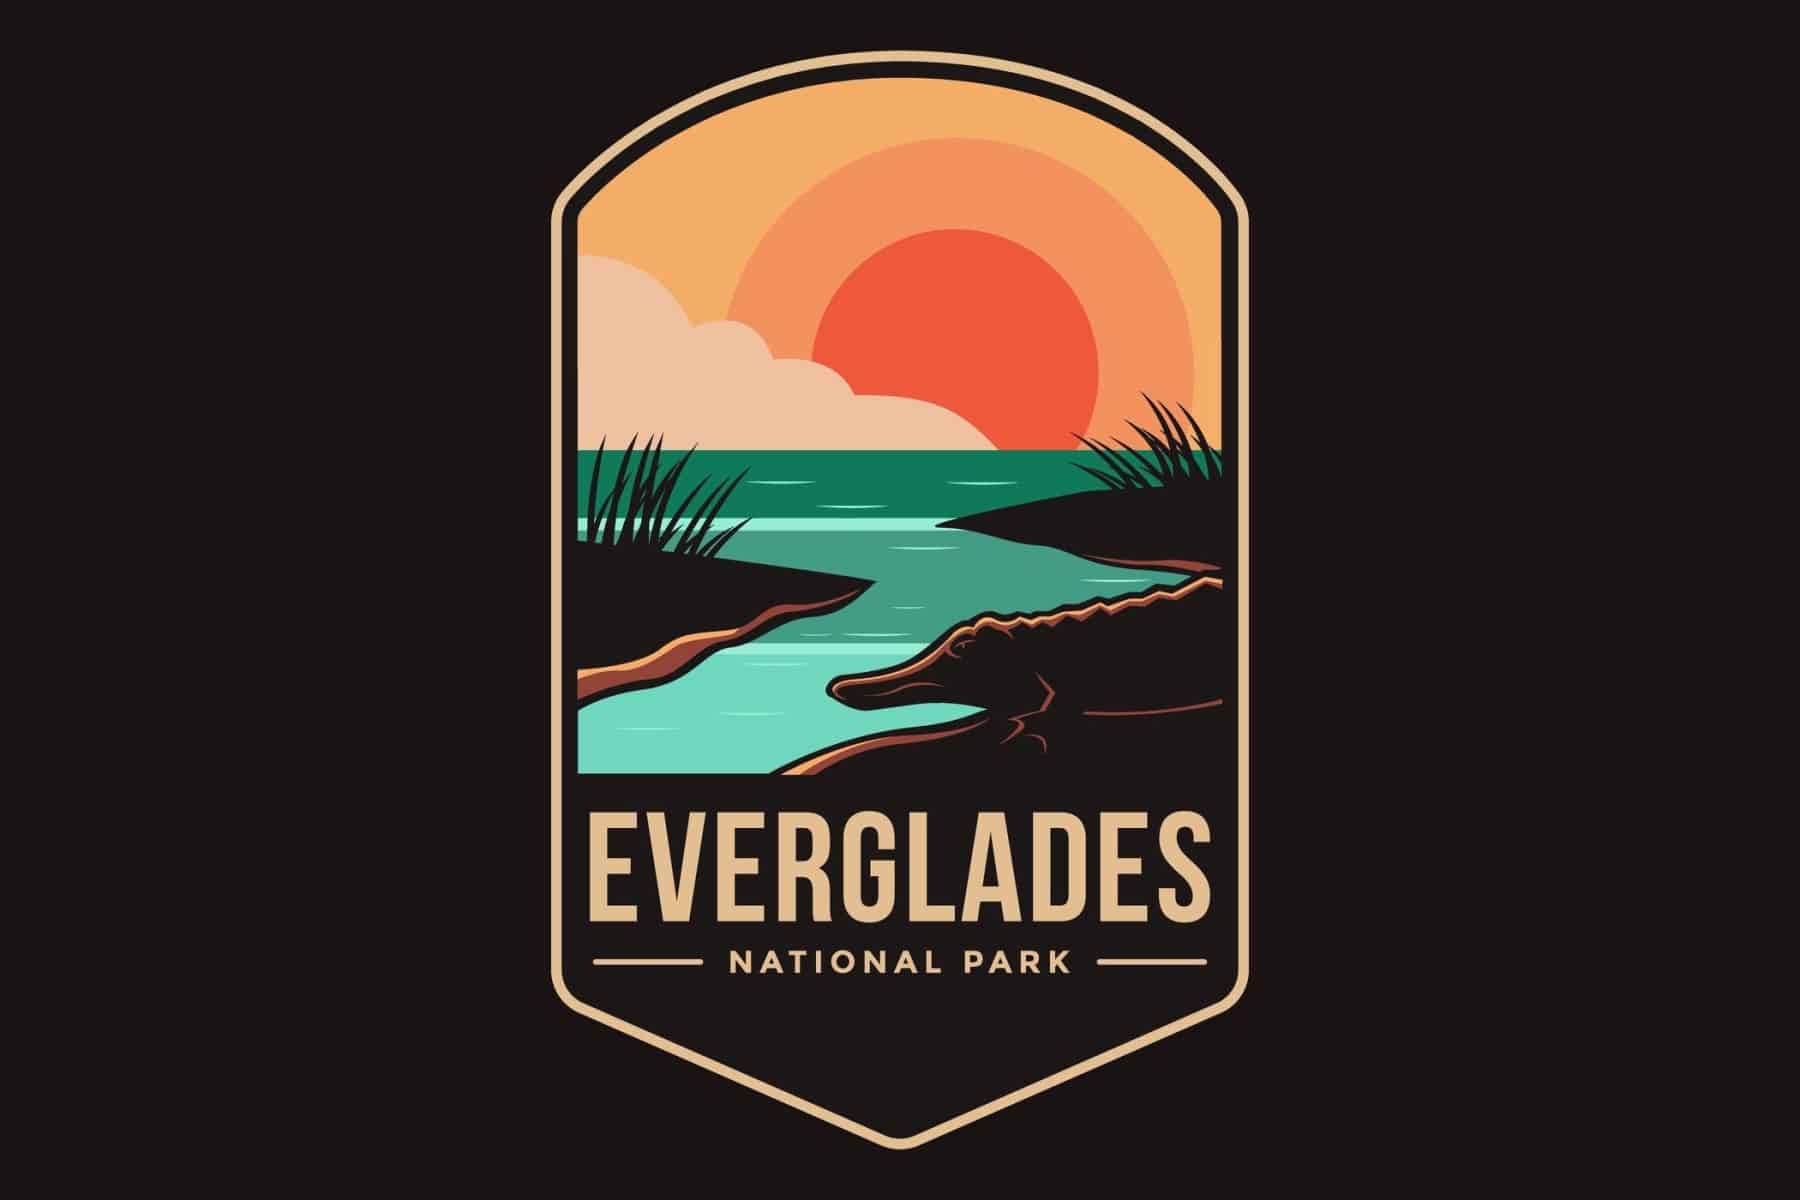 Everglades National Park Facts